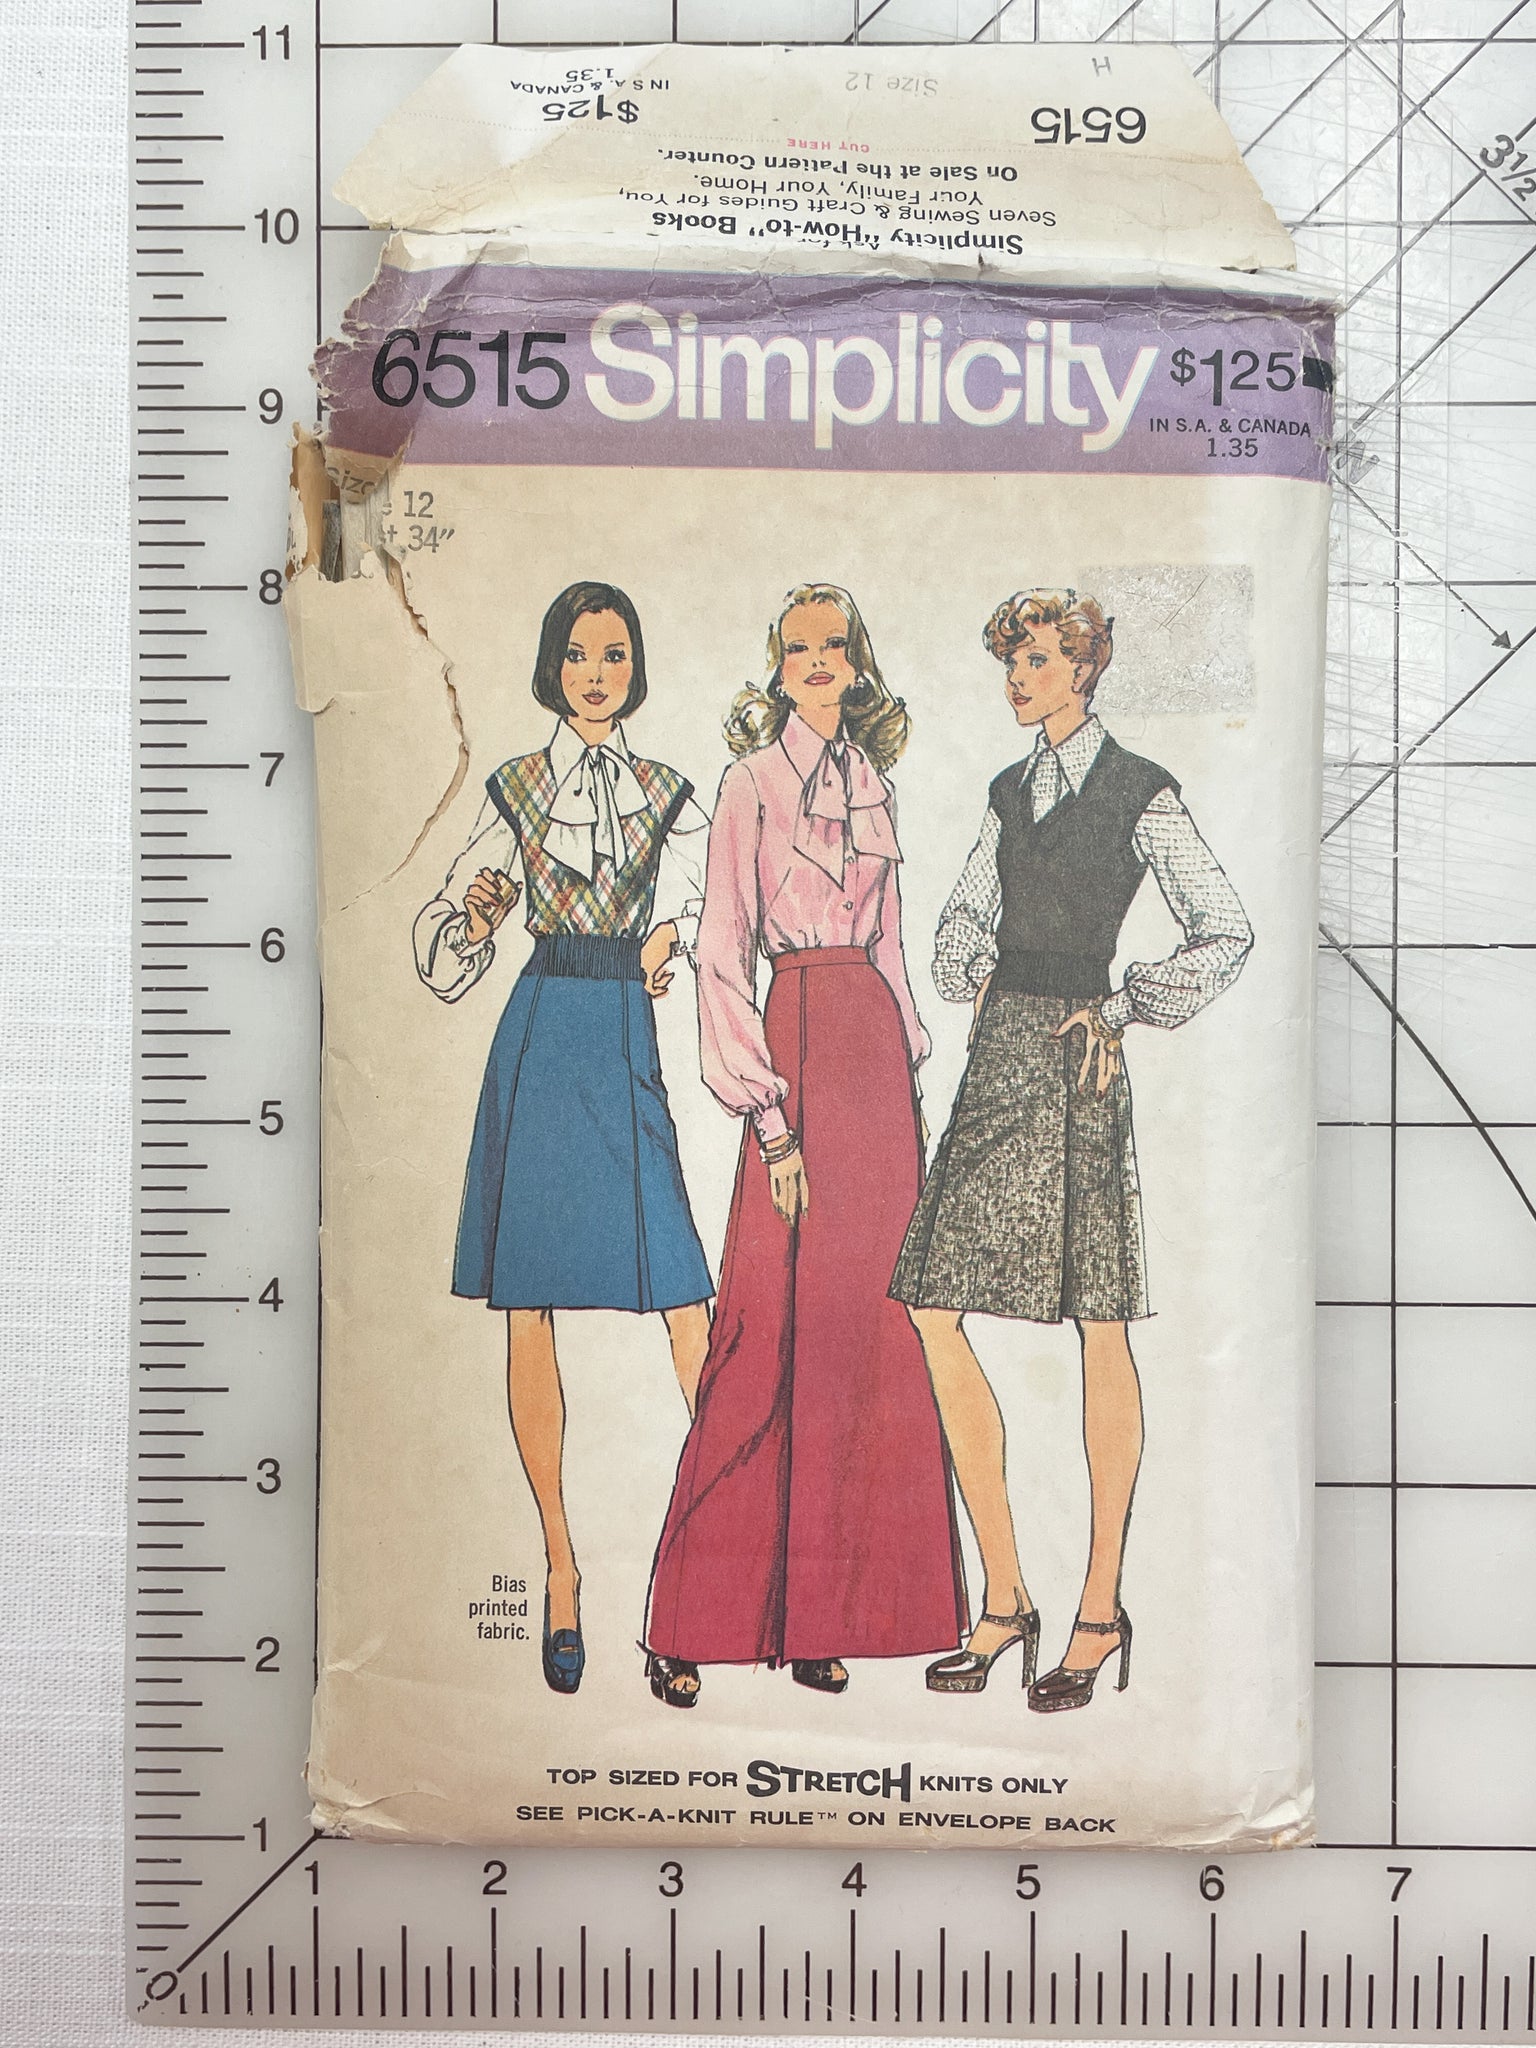 1974 Simplicity 6515 Pattern - Women's Knit Skirt, Pullover Top, Blouse and Scarf